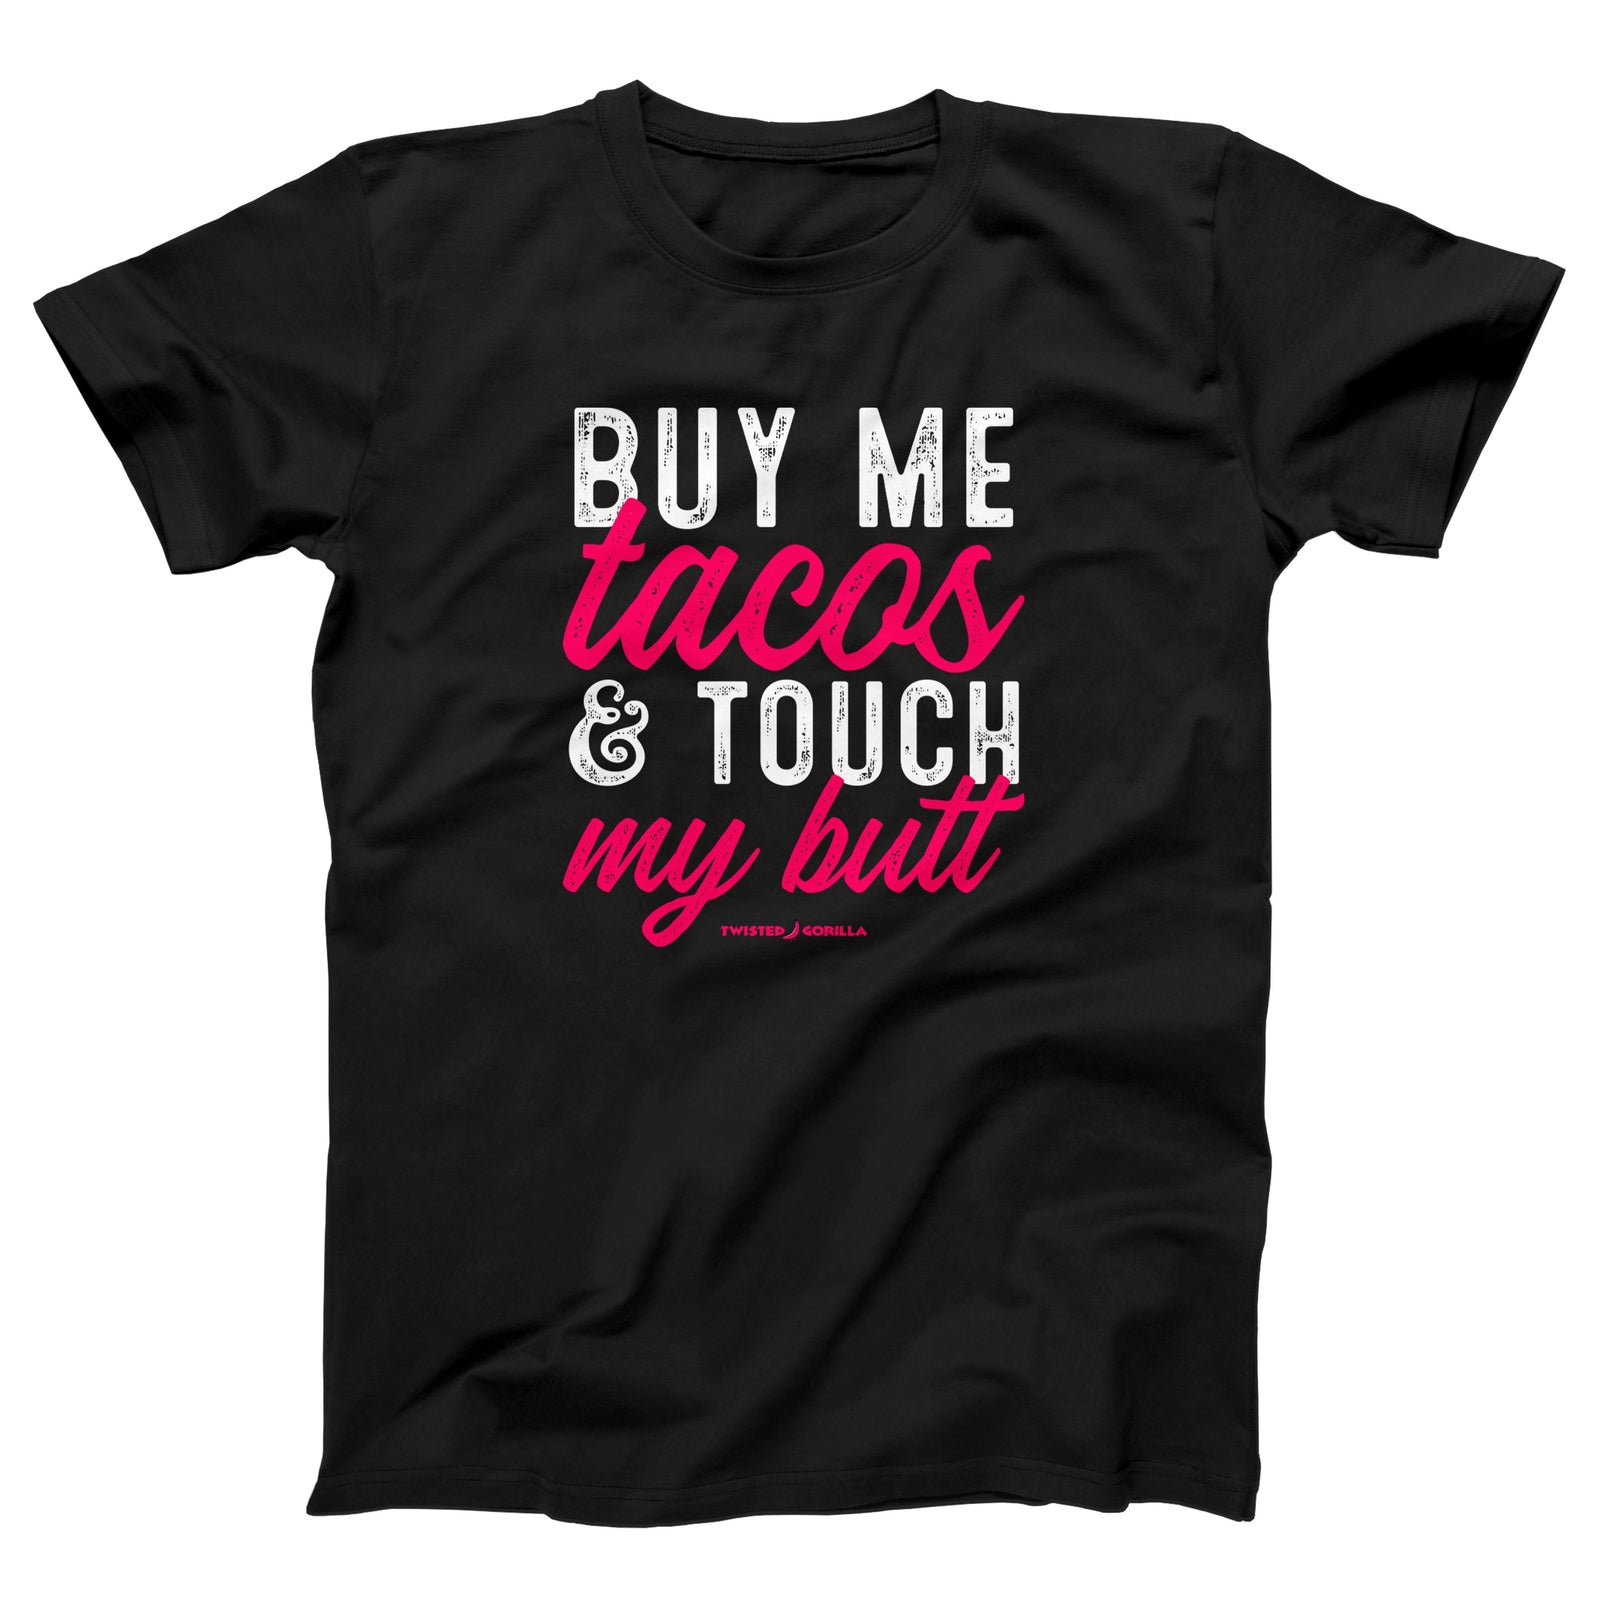 //marionmartigny.com/s/files/1/0274/2488/2766/products/buy-me-tacos-and-touch-my-butt-menunisex-t-shirt-385082_5000x.jpg?v=1630330668 5000w,
    //marionmartigny.com/s/files/1/0274/2488/2766/products/buy-me-tacos-and-touch-my-butt-menunisex-t-shirt-385082_4500x.jpg?v=1630330668 4500w,
    //marionmartigny.com/s/files/1/0274/2488/2766/products/buy-me-tacos-and-touch-my-butt-menunisex-t-shirt-385082_4000x.jpg?v=1630330668 4000w,
    //marionmartigny.com/s/files/1/0274/2488/2766/products/buy-me-tacos-and-touch-my-butt-menunisex-t-shirt-385082_3500x.jpg?v=1630330668 3500w,
    //marionmartigny.com/s/files/1/0274/2488/2766/products/buy-me-tacos-and-touch-my-butt-menunisex-t-shirt-385082_3000x.jpg?v=1630330668 3000w,
    //marionmartigny.com/s/files/1/0274/2488/2766/products/buy-me-tacos-and-touch-my-butt-menunisex-t-shirt-385082_2500x.jpg?v=1630330668 2500w,
    //marionmartigny.com/s/files/1/0274/2488/2766/products/buy-me-tacos-and-touch-my-butt-menunisex-t-shirt-385082_2000x.jpg?v=1630330668 2000w,
    //marionmartigny.com/s/files/1/0274/2488/2766/products/buy-me-tacos-and-touch-my-butt-menunisex-t-shirt-385082_1800x.jpg?v=1630330668 1800w,
    //marionmartigny.com/s/files/1/0274/2488/2766/products/buy-me-tacos-and-touch-my-butt-menunisex-t-shirt-385082_1600x.jpg?v=1630330668 1600w,
    //marionmartigny.com/s/files/1/0274/2488/2766/products/buy-me-tacos-and-touch-my-butt-menunisex-t-shirt-385082_1400x.jpg?v=1630330668 1400w,
    //marionmartigny.com/s/files/1/0274/2488/2766/products/buy-me-tacos-and-touch-my-butt-menunisex-t-shirt-385082_1200x.jpg?v=1630330668 1200w,
    //marionmartigny.com/s/files/1/0274/2488/2766/products/buy-me-tacos-and-touch-my-butt-menunisex-t-shirt-385082_1000x.jpg?v=1630330668 1000w,
    //marionmartigny.com/s/files/1/0274/2488/2766/products/buy-me-tacos-and-touch-my-butt-menunisex-t-shirt-385082_800x.jpg?v=1630330668 800w,
    //marionmartigny.com/s/files/1/0274/2488/2766/products/buy-me-tacos-and-touch-my-butt-menunisex-t-shirt-385082_600x.jpg?v=1630330668 600w,
    //marionmartigny.com/s/files/1/0274/2488/2766/products/buy-me-tacos-and-touch-my-butt-menunisex-t-shirt-385082_400x.jpg?v=1630330668 400w,
    //marionmartigny.com/s/files/1/0274/2488/2766/products/buy-me-tacos-and-touch-my-butt-menunisex-t-shirt-385082_200x.jpg?v=1630330668 200w